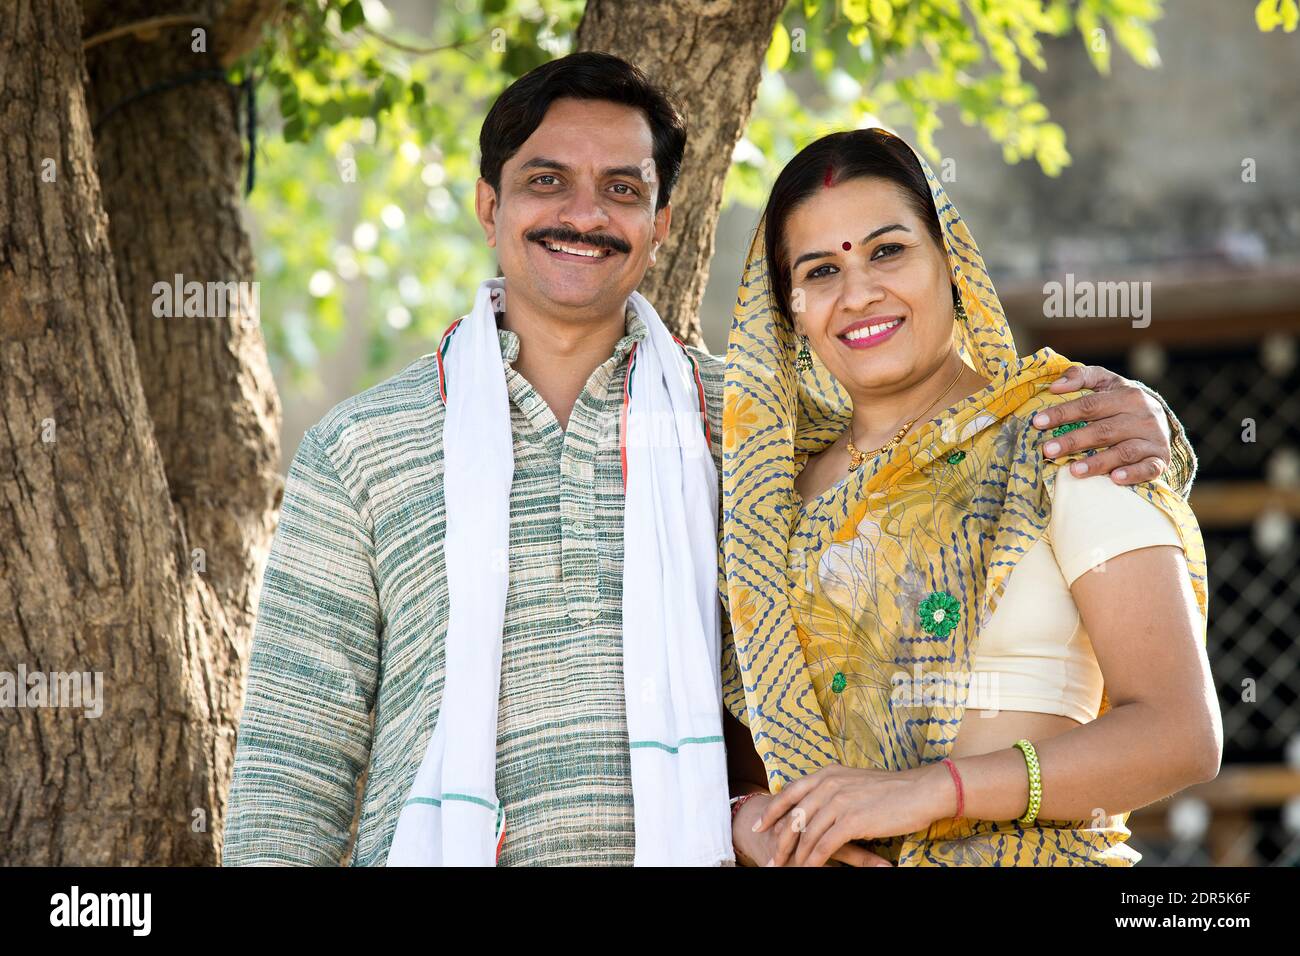 Happy rural Indian farmer with his wife at village Stock Photo